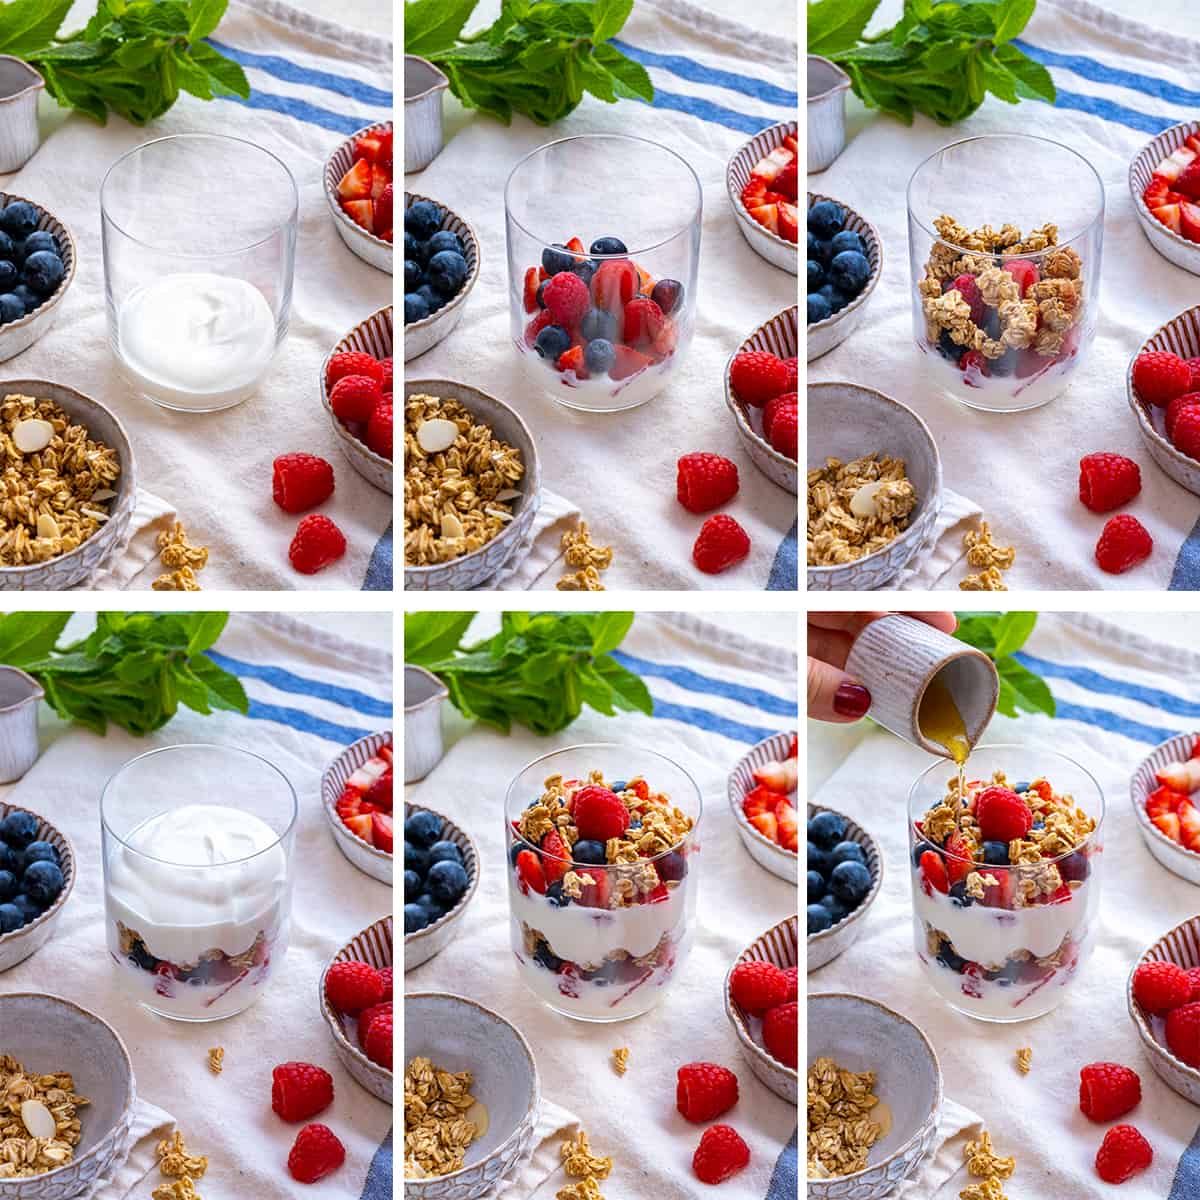 A collage of images showing how to make layers for a yogurt parfait.